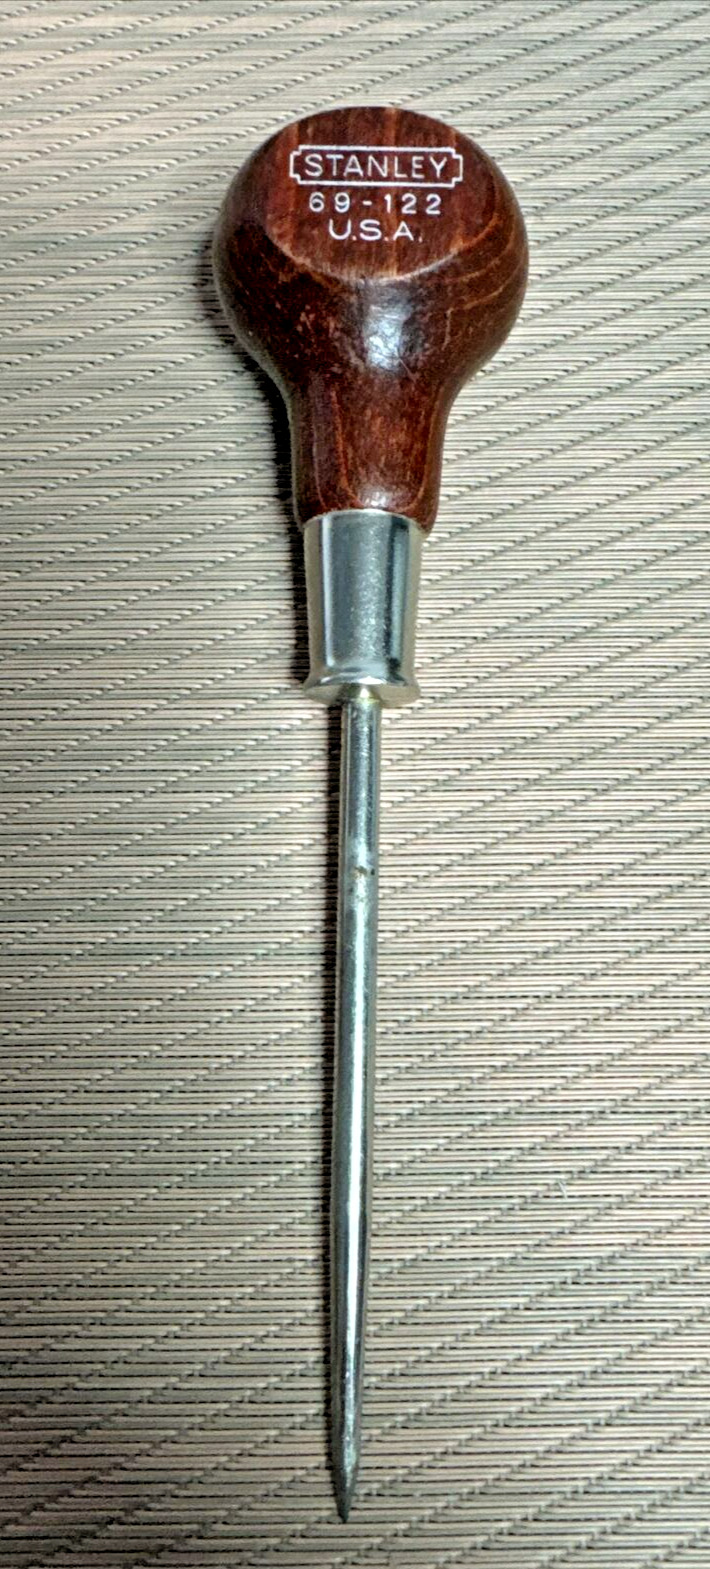 STANLEY 69-122 SCRATCH AWL WOOD HANDLE MADE IN USA